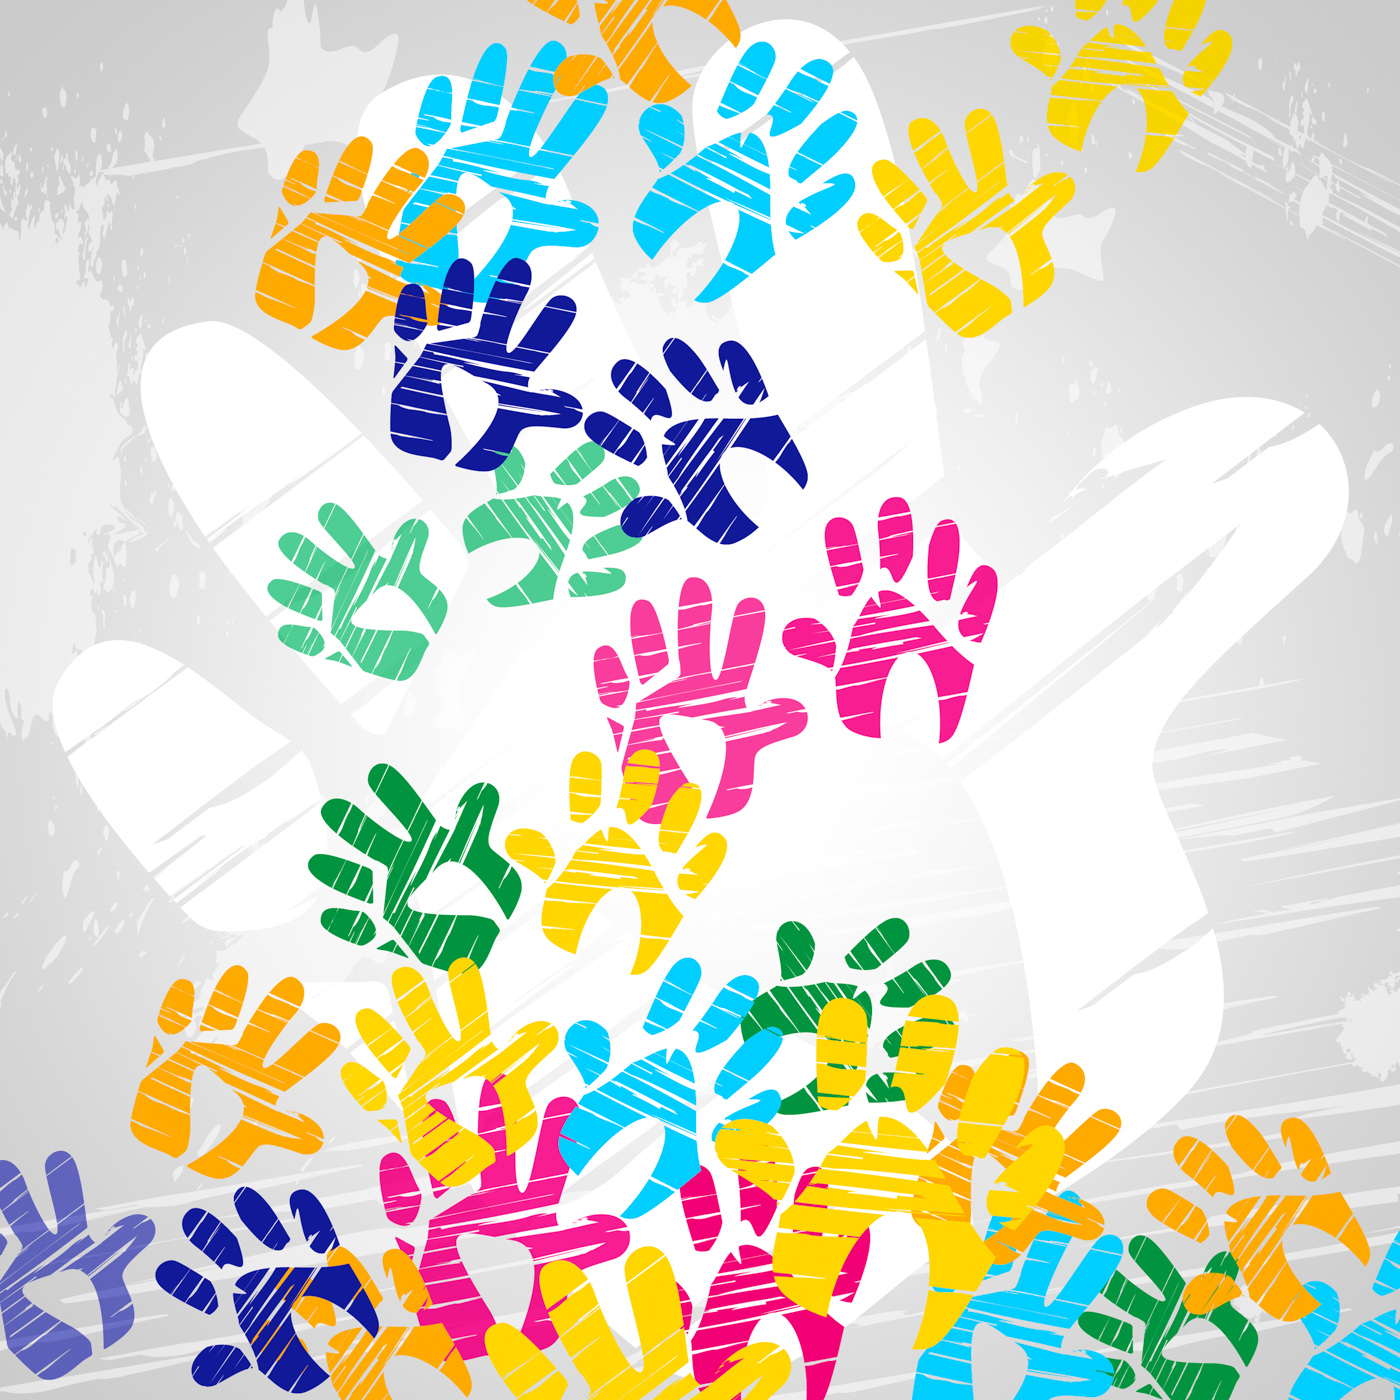 Handprints color indicates drawing artwork and colors photo